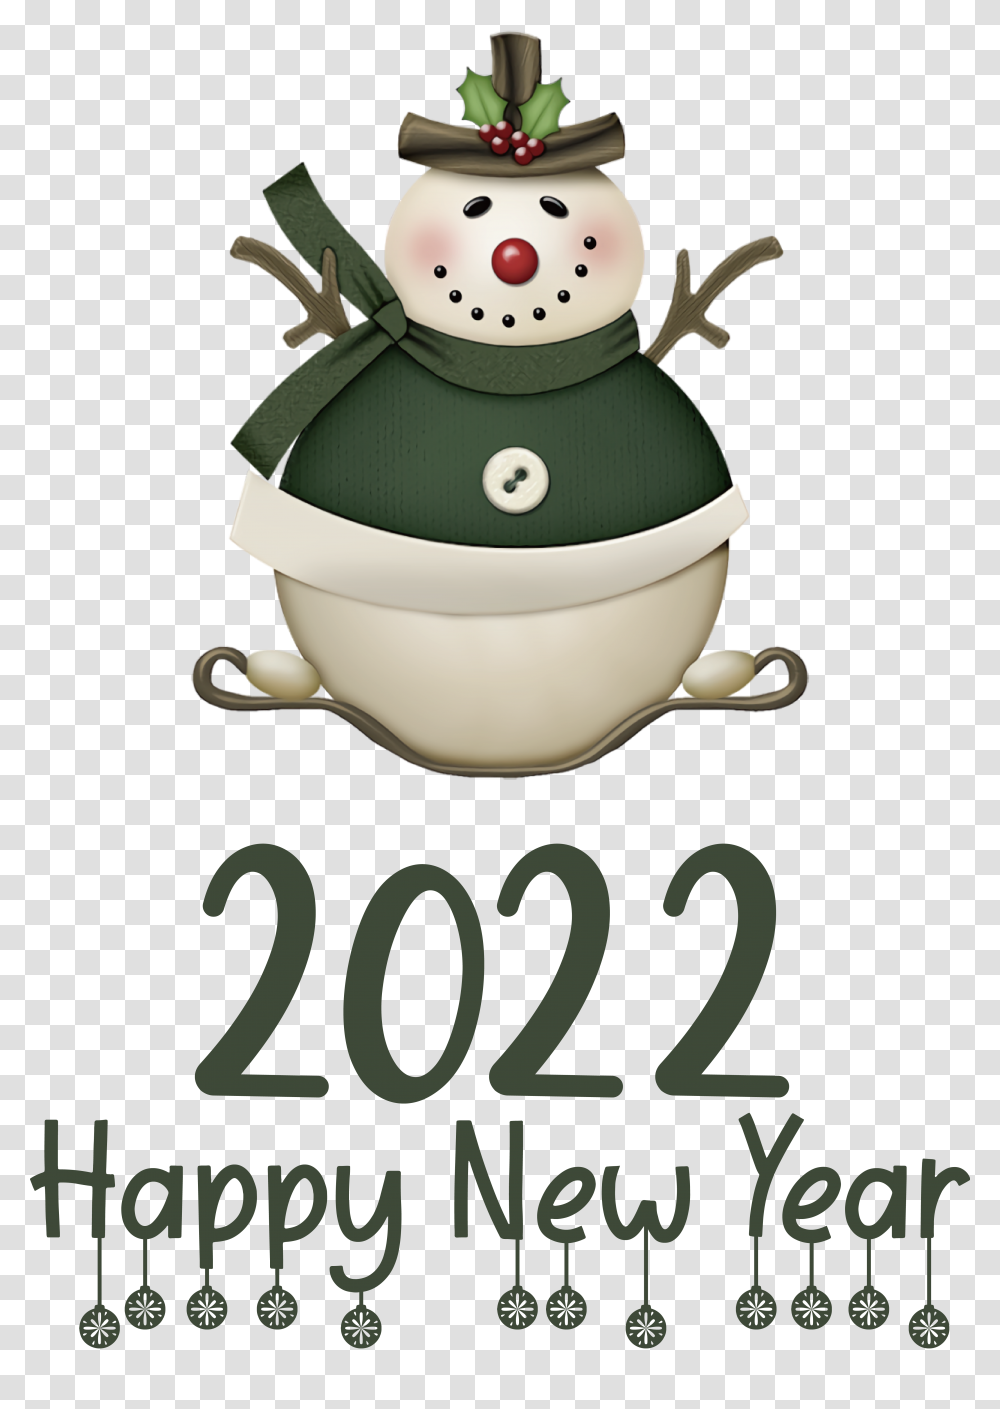 Mrs Claus New Year Merry Christmas And Happy New Year 2022 For New Year, Snowman, Winter, Outdoors, Nature Transparent Png